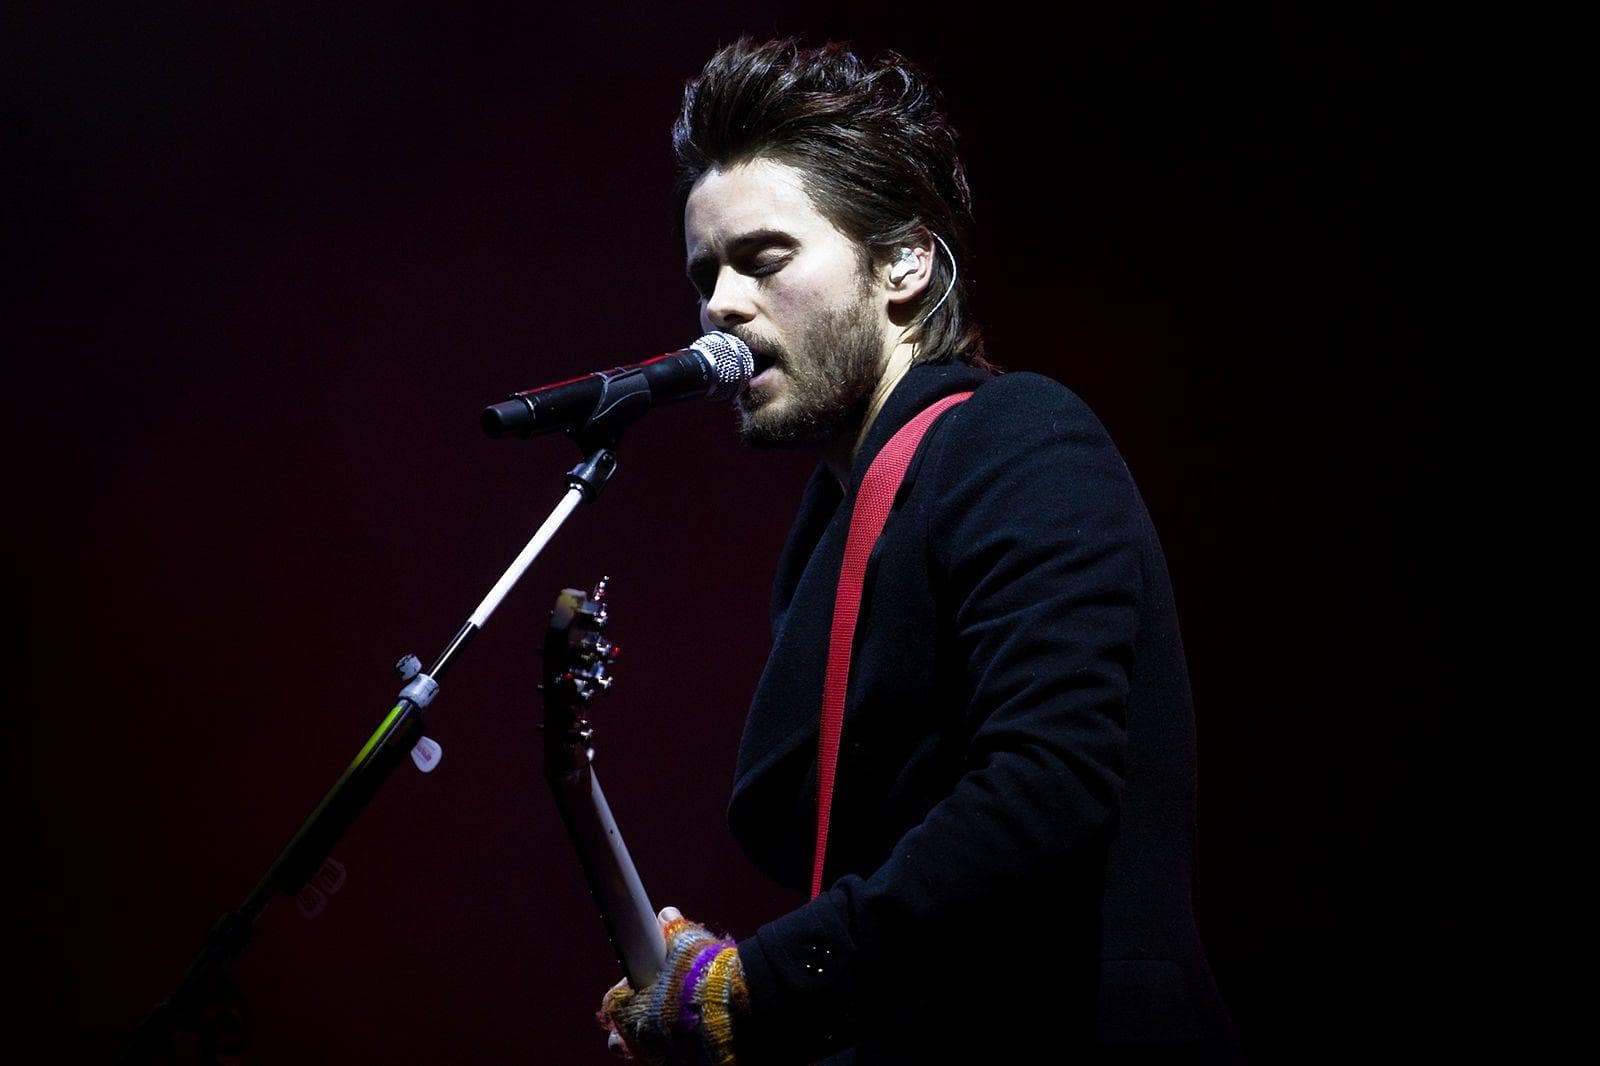 Random Surprising Facts About Jared Leto